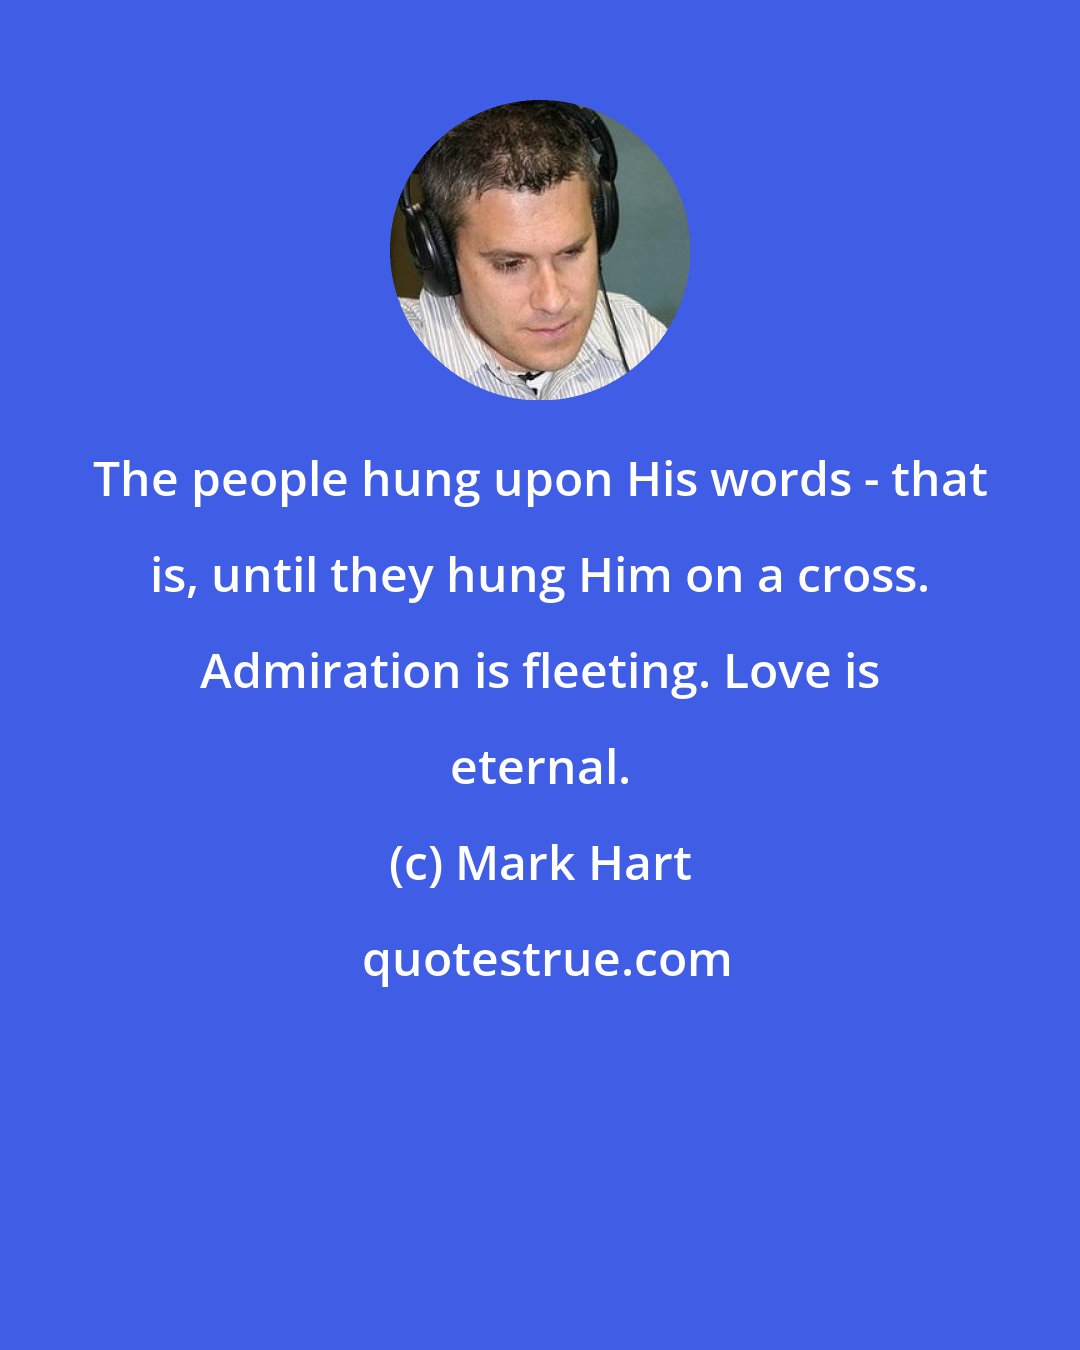 Mark Hart: The people hung upon His words - that is, until they hung Him on a cross. Admiration is fleeting. Love is eternal.